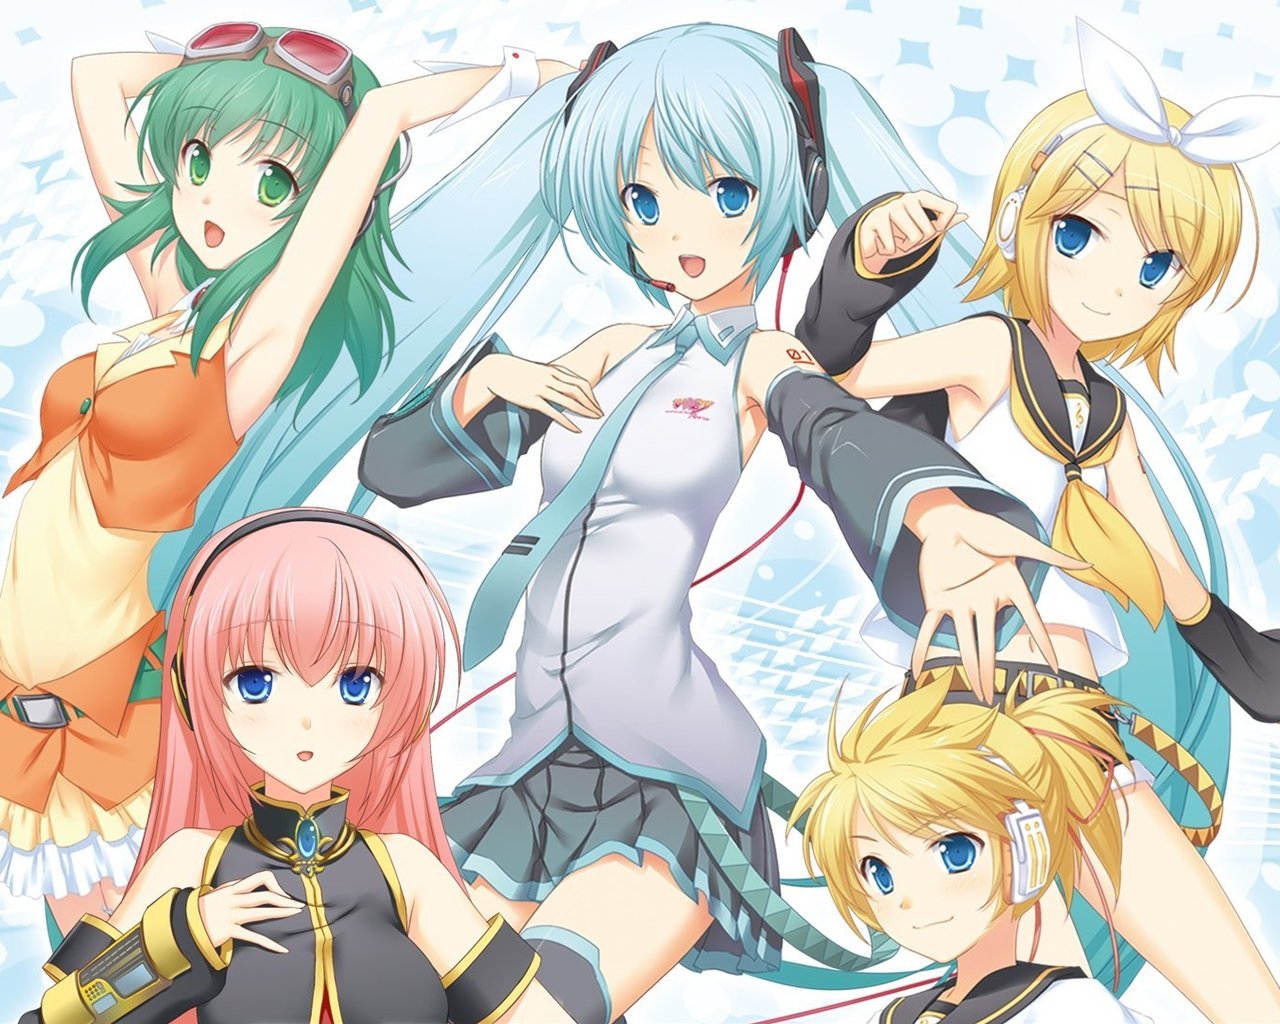 Vocaloid ボーカロイド 壁紙家 ボーカロイド ミク その他複数 初音ミク ボーカロイド壁紙画像 ボカロ Vocaloid Naver まとめ